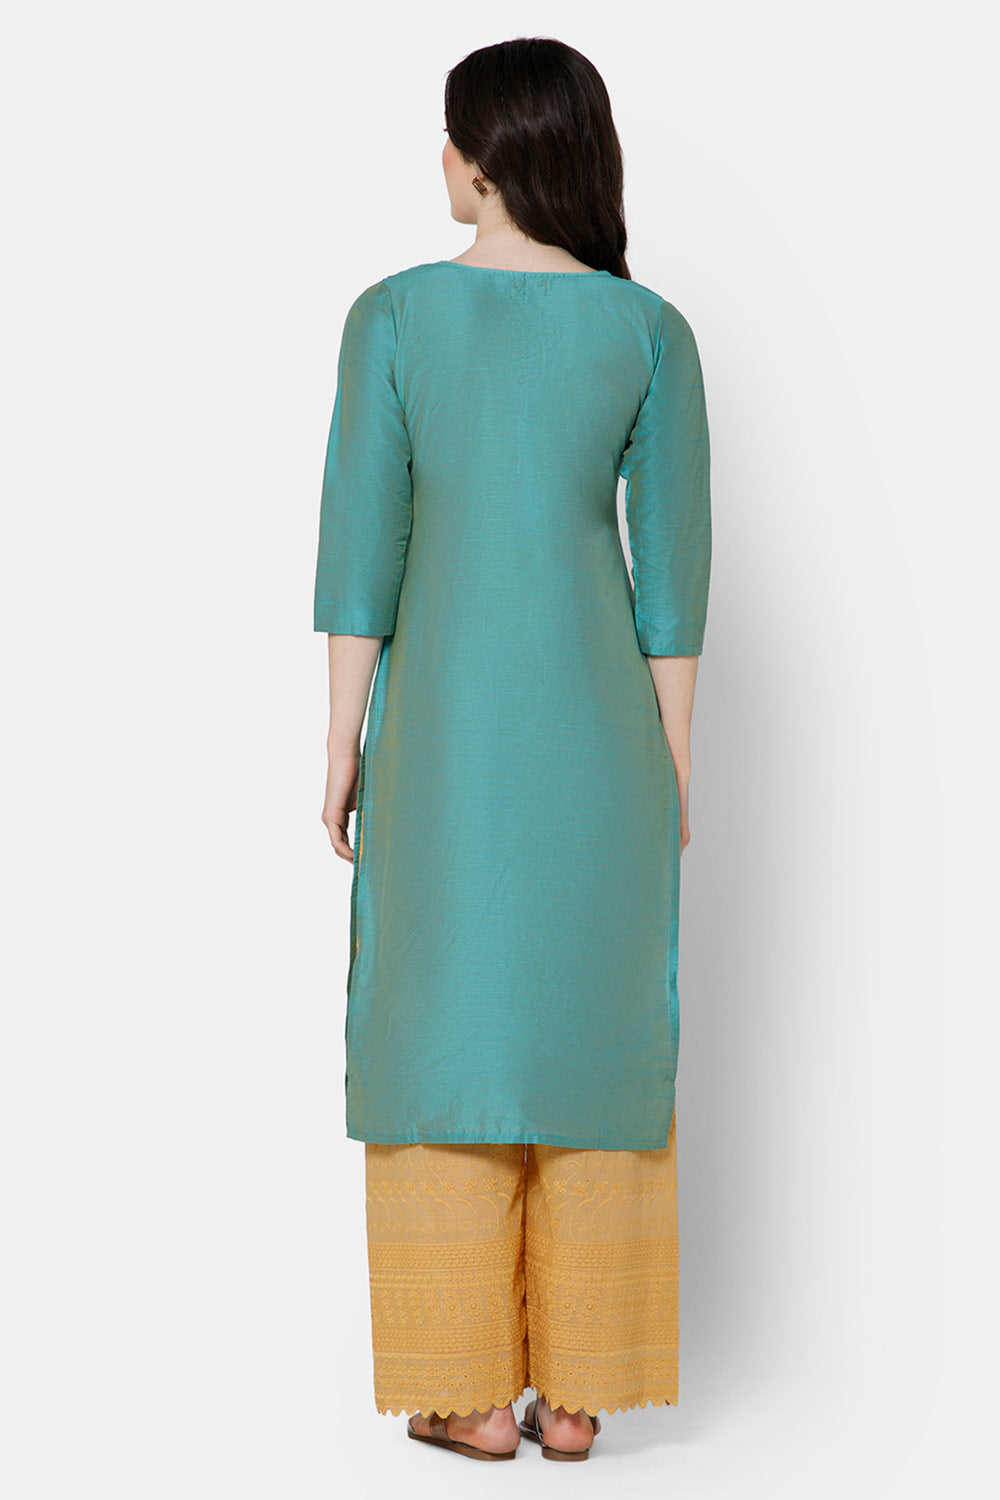 Mythri Women's Ethnic wear with Sequins Embroidery - Sea Green - E038